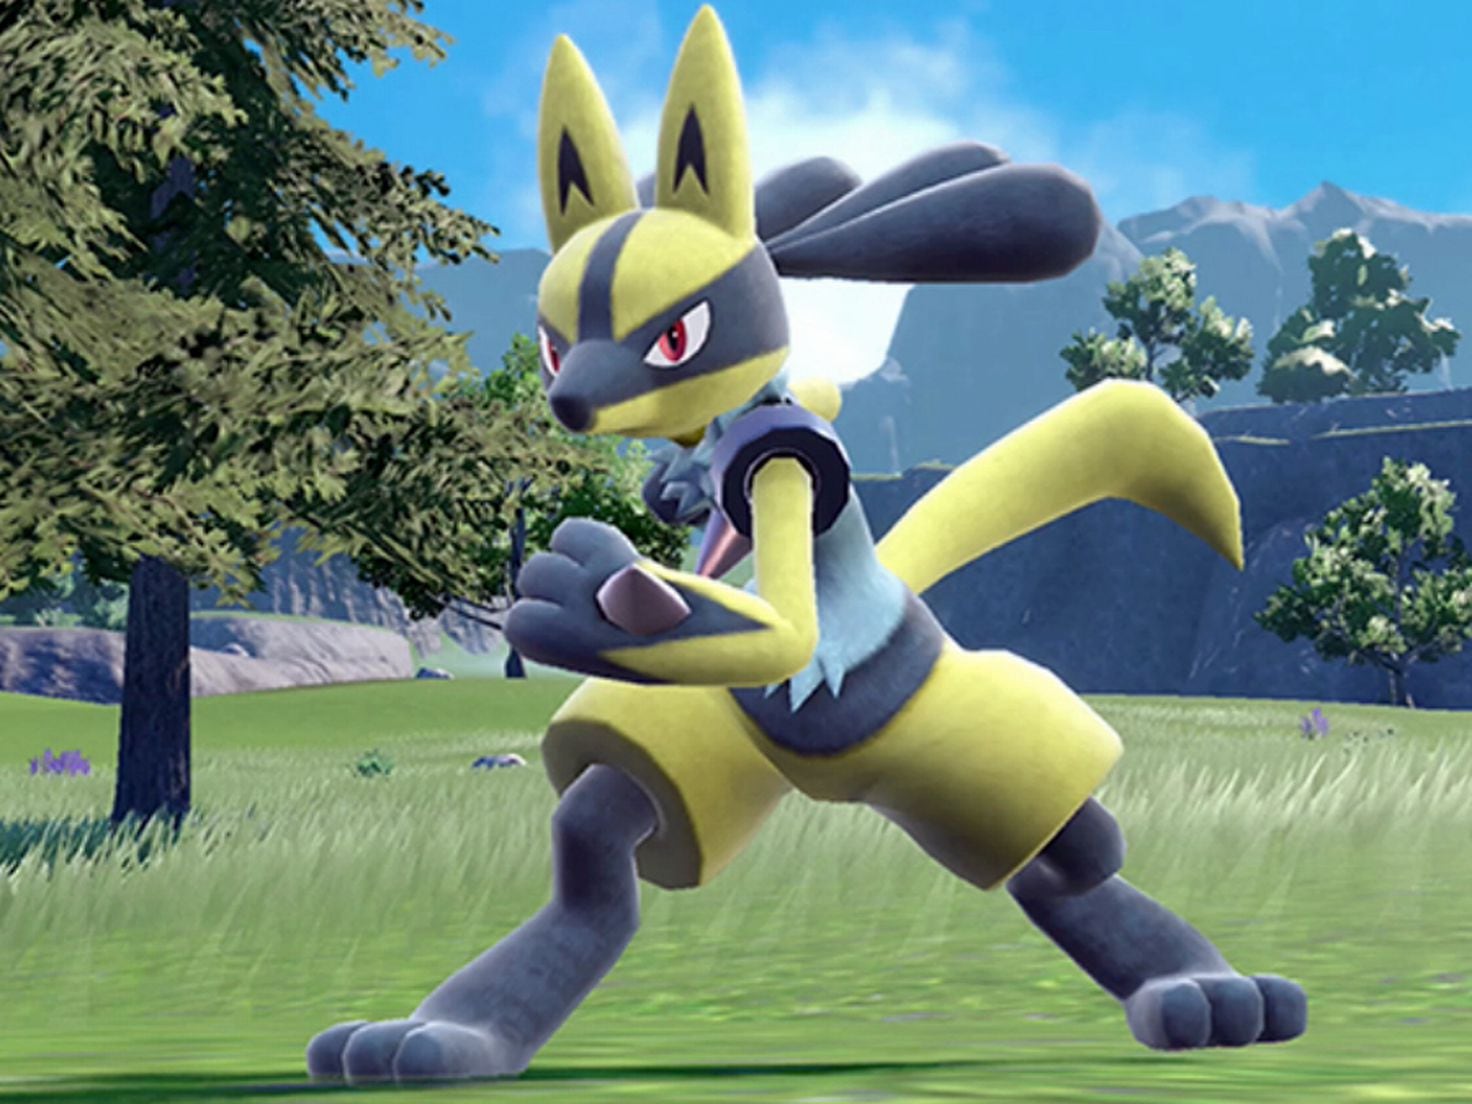 Get a Shiny Lucario in Pokémon Scarlet & Violet with this Mystery Gift Code  - Meristation